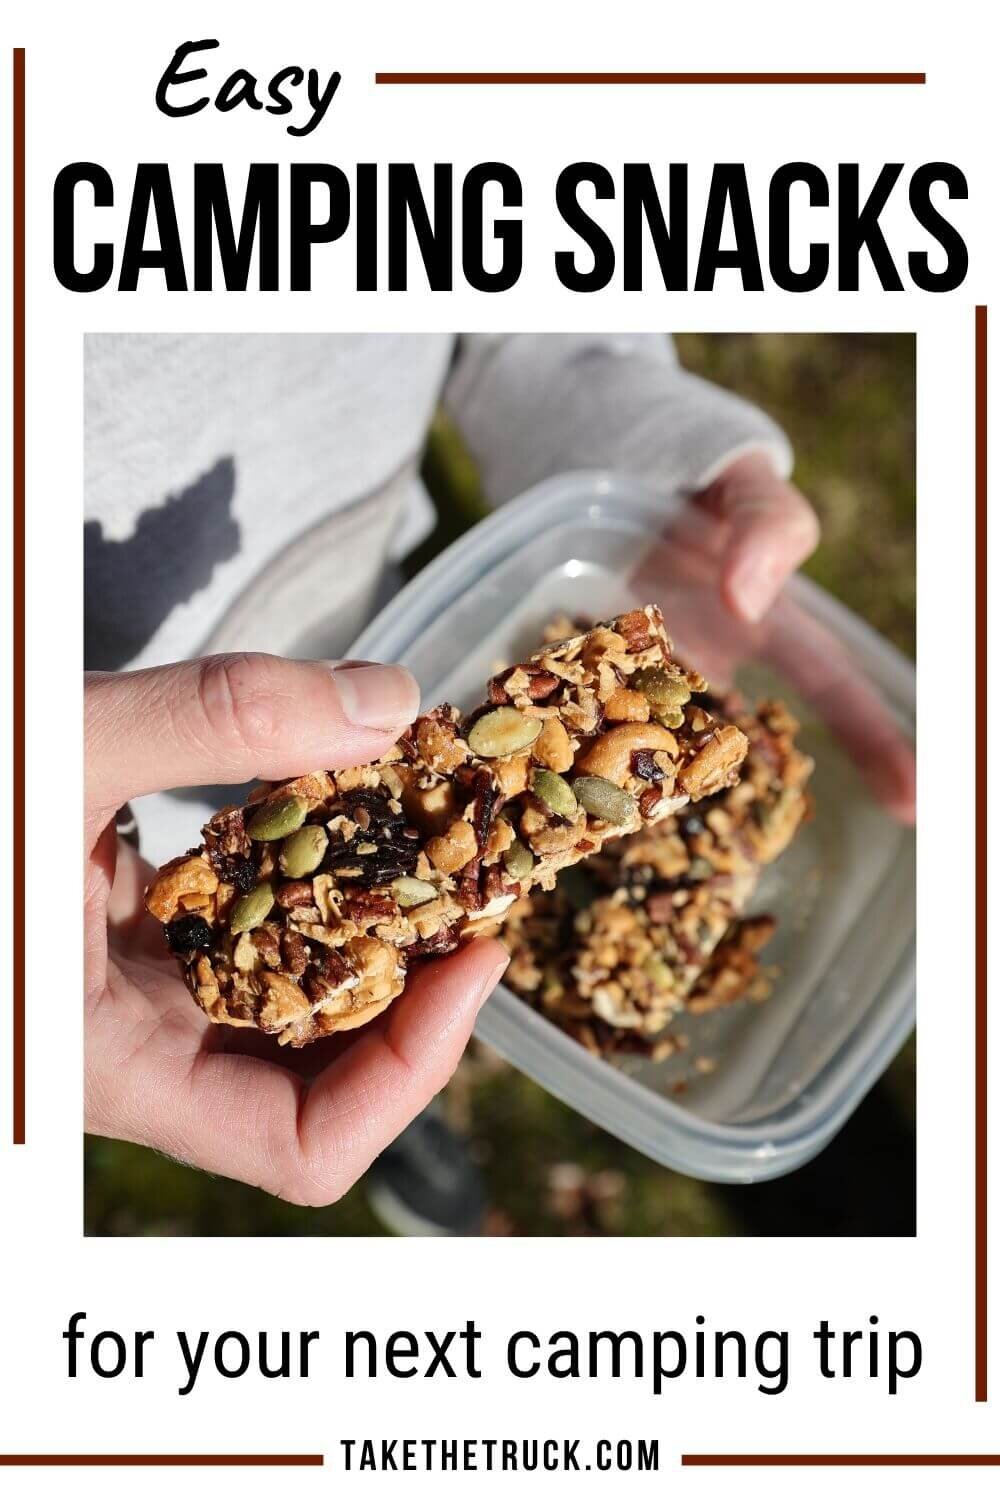 Over 30 easy camping snacks divided into: healthy camping snacks for adults and kids, simple camping snacks for kids, and camping snacks to buy. These are all simple camping snack ideas!